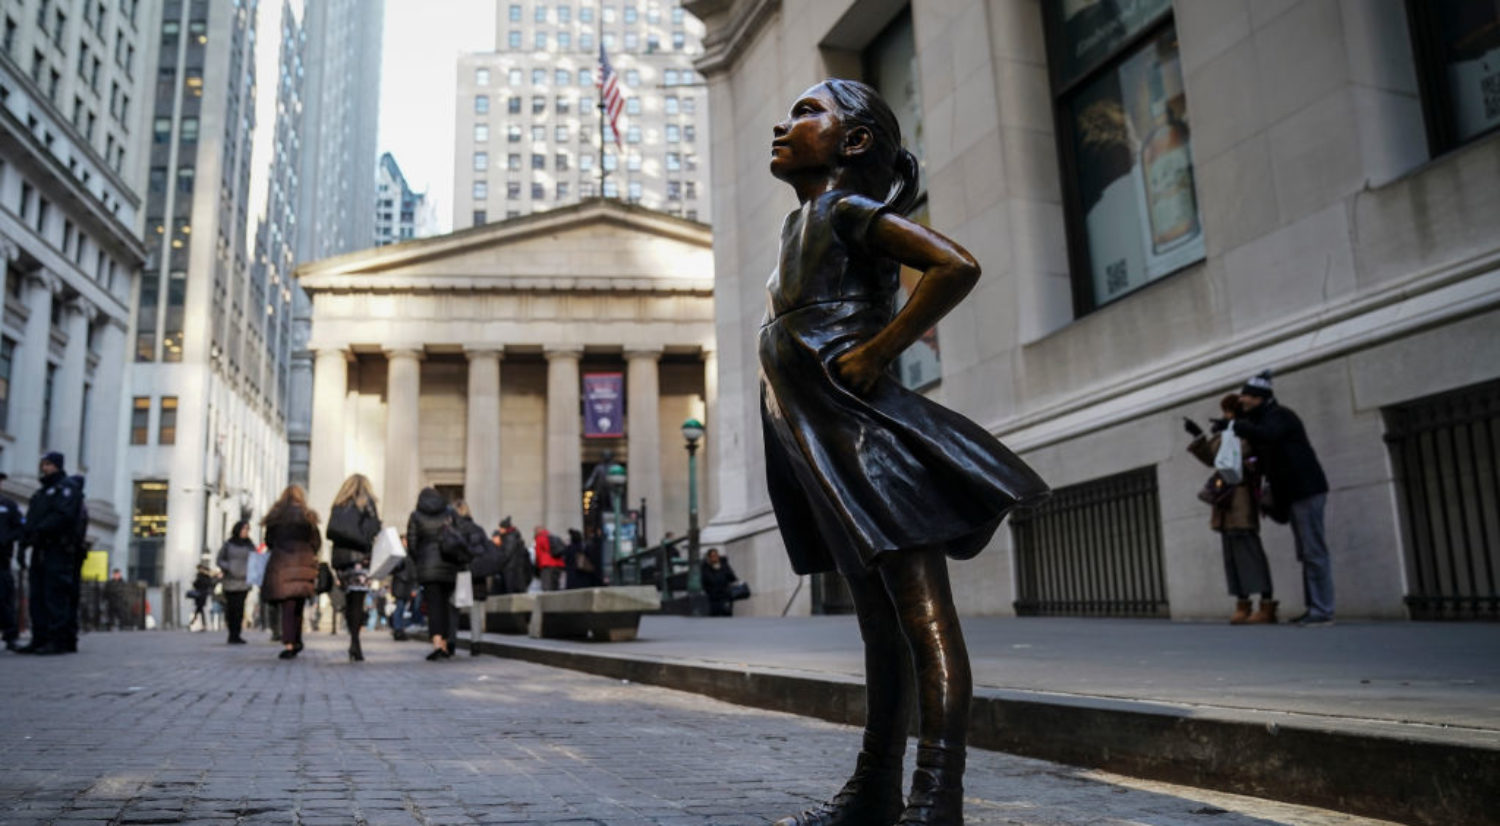 'Fearless Girl' at the New York Stock Exchange. Photo by Drew Angerer/Getty Images.